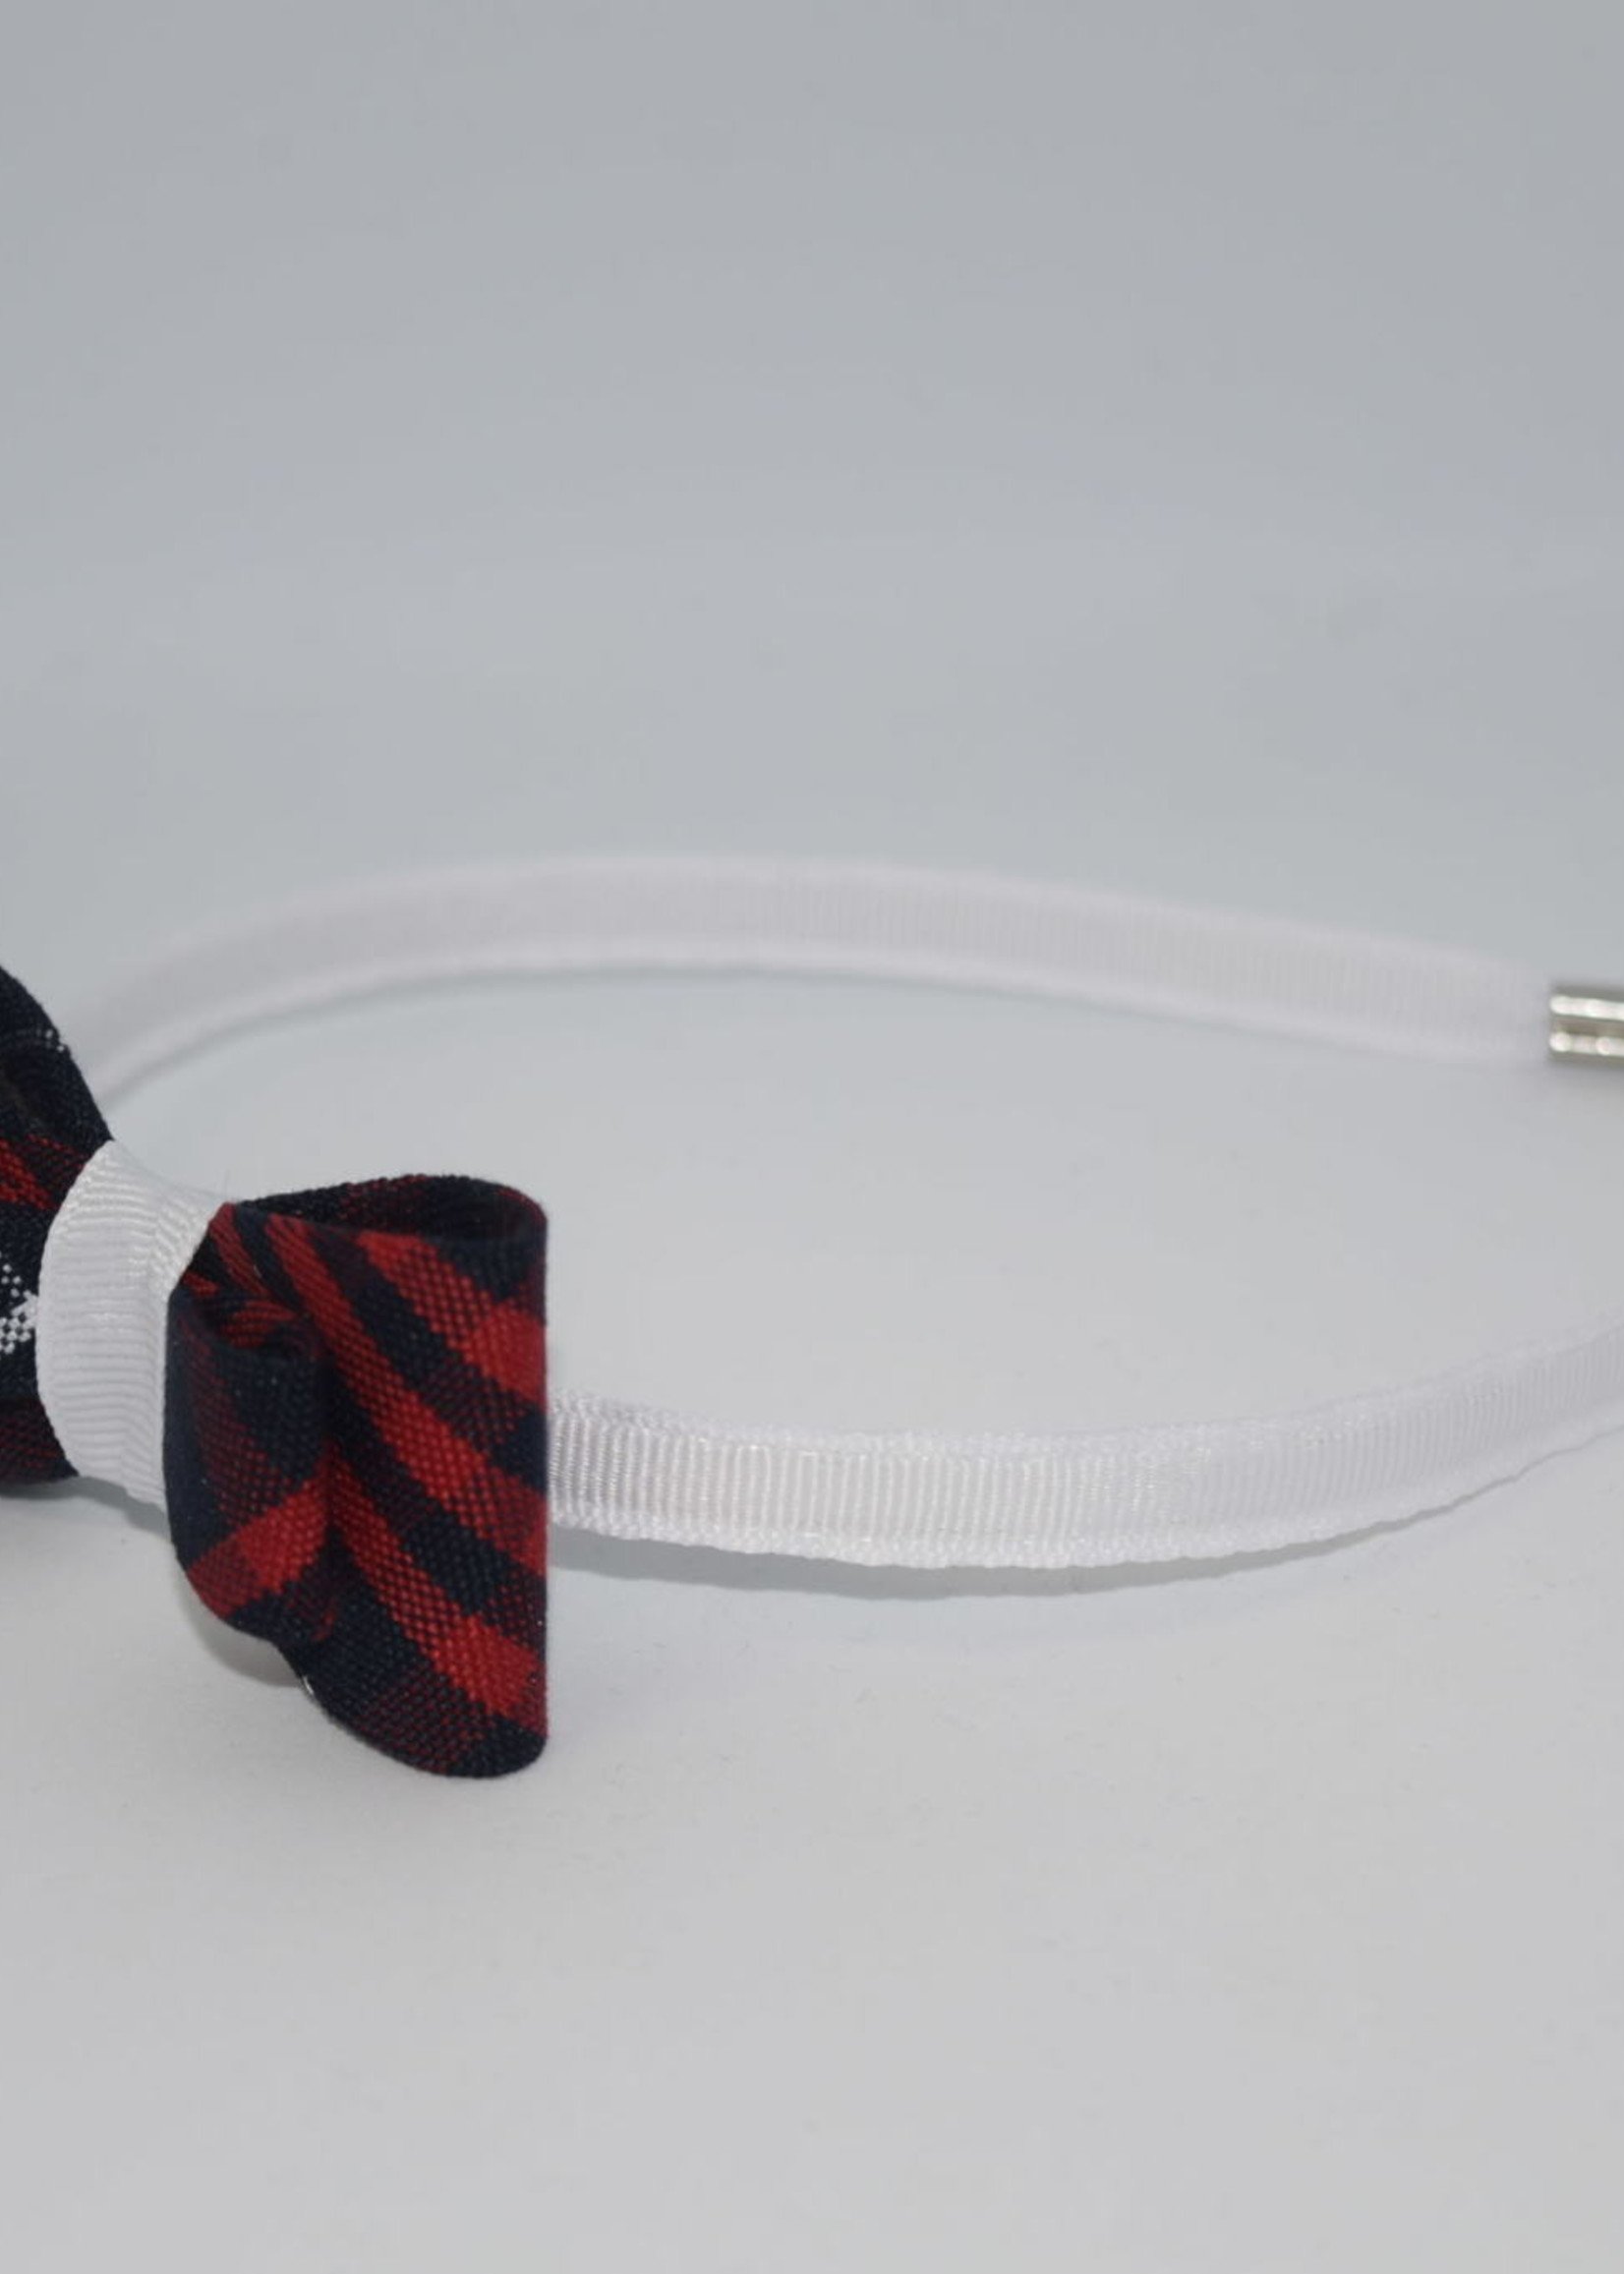 Double Tailored Ponytail Bow on Headband P36 RED